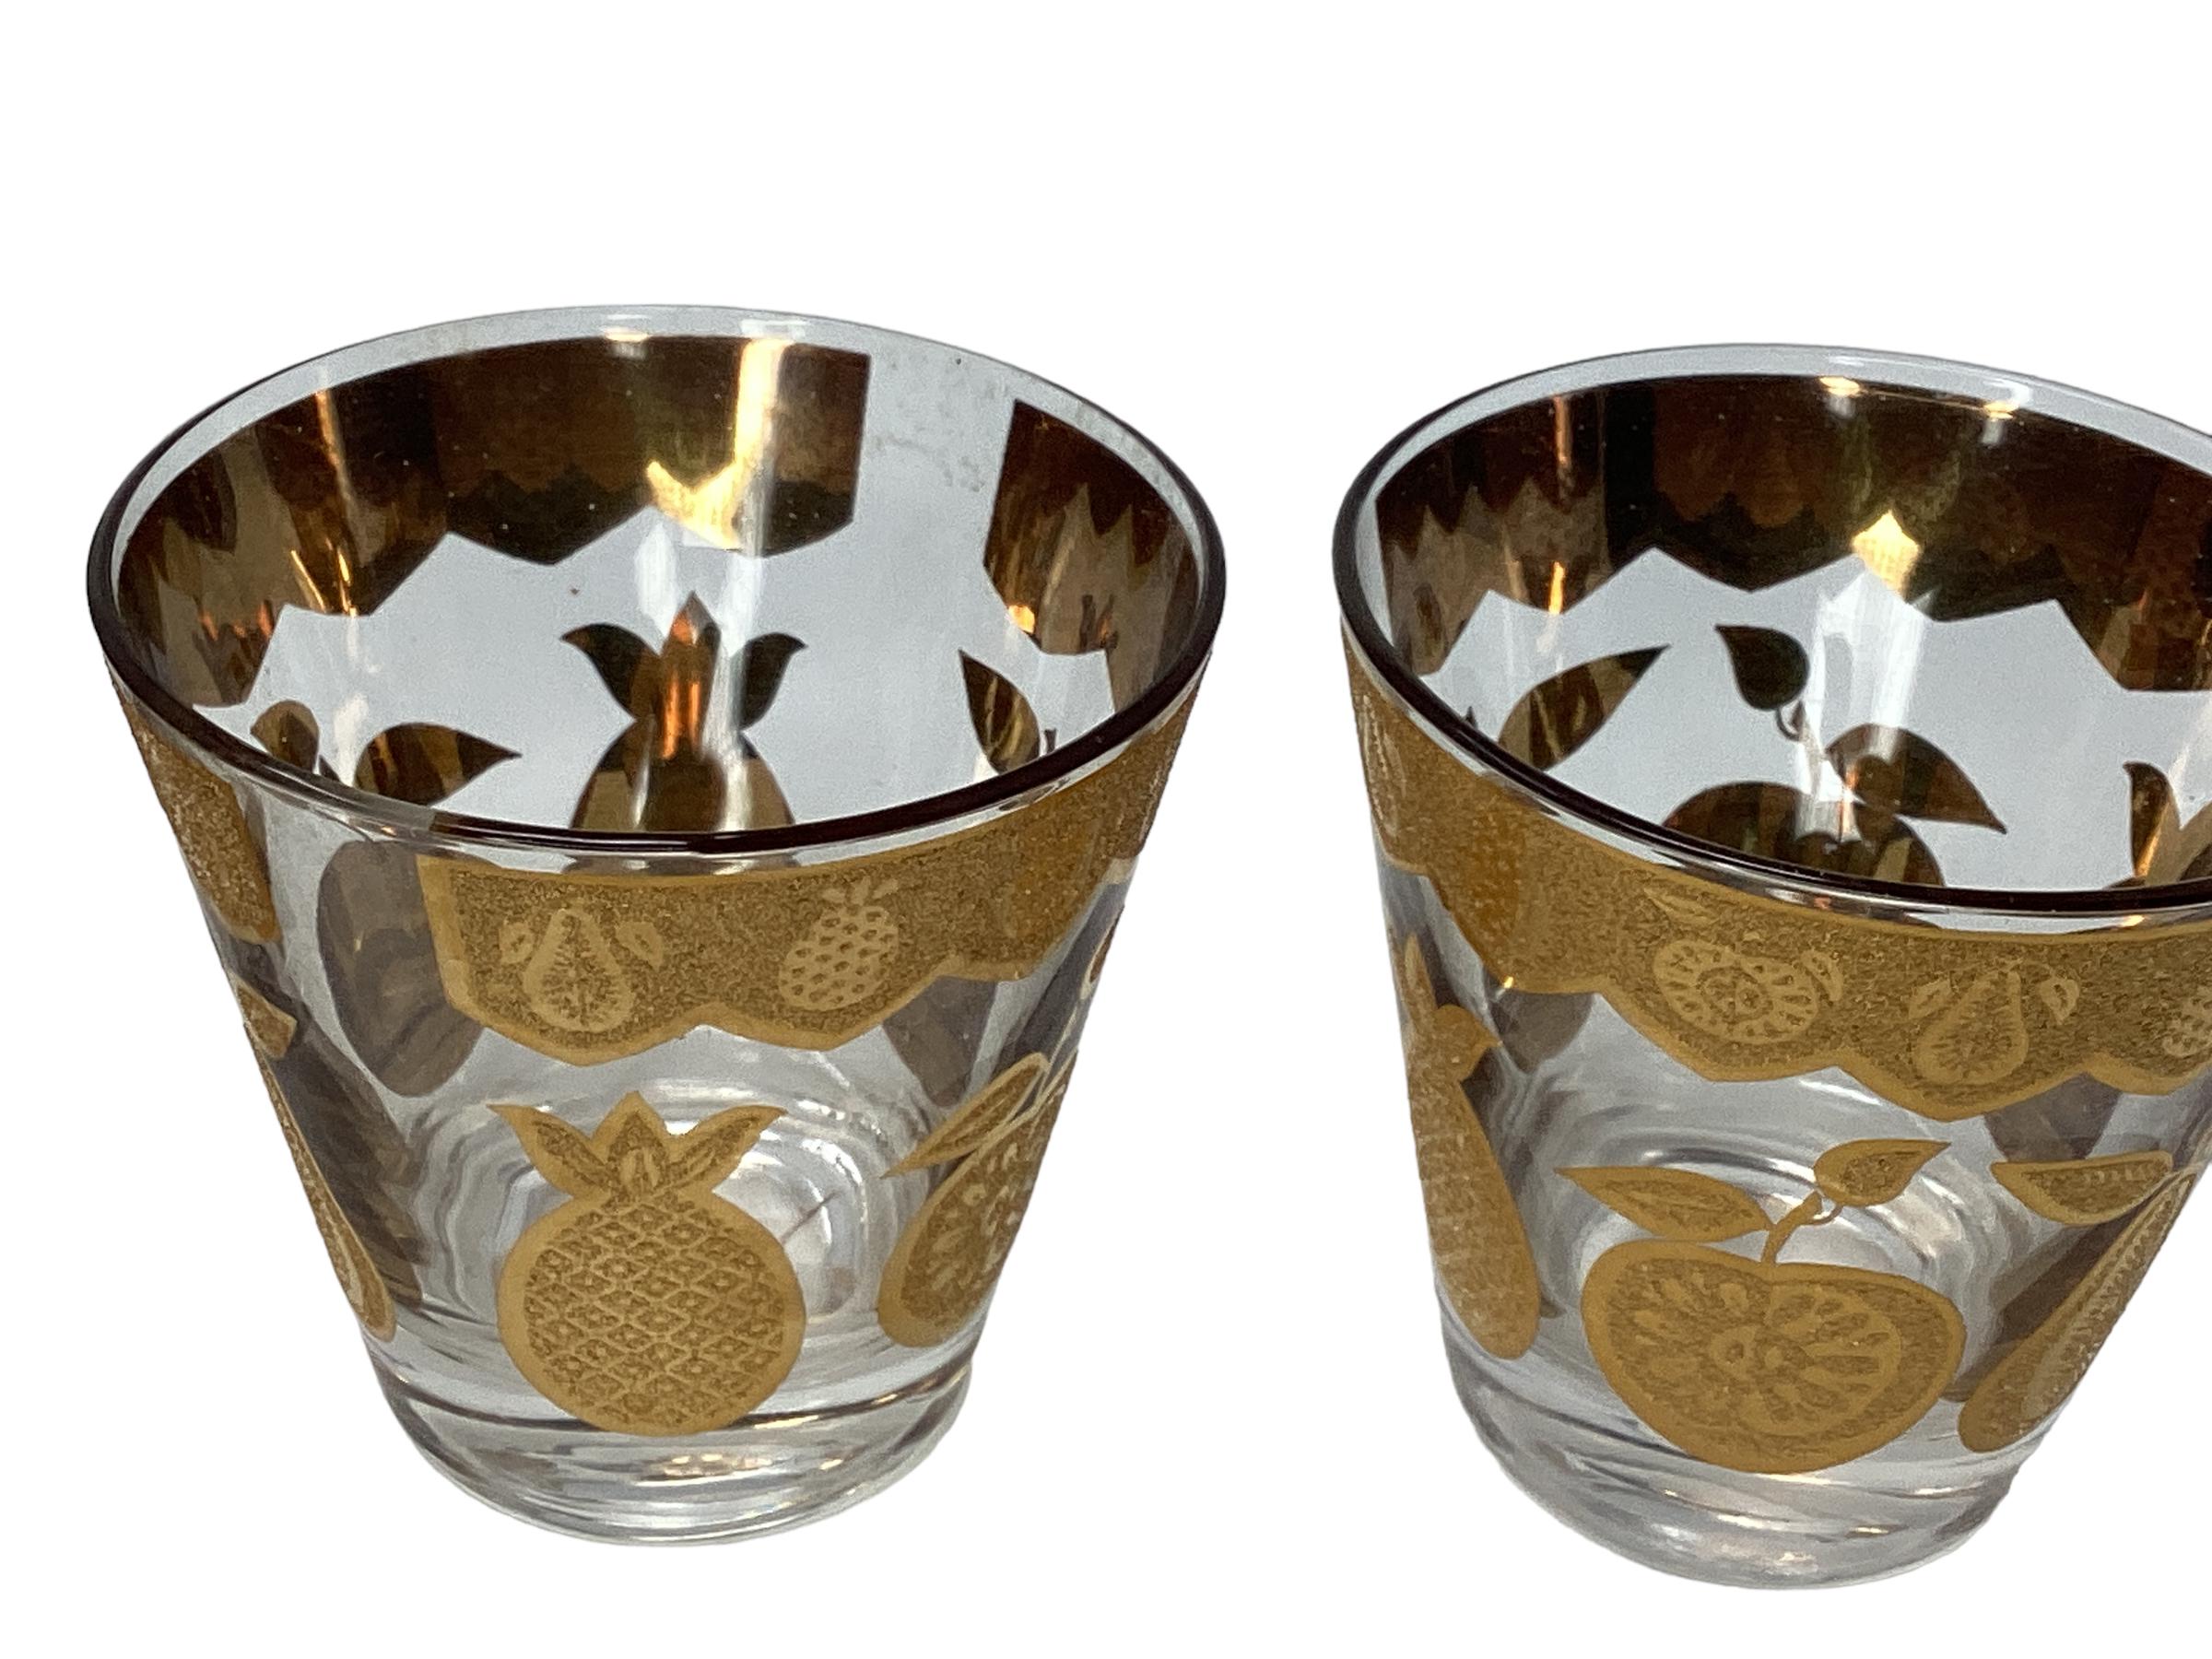 Set of 4 Vintage Culver Florentine Pattern Old Fashioned Glasses in the Florentine pattern, decorated in smooth and textured 22k gold with apple, pear, pineapple and grapes design.
There are 2 sets available. Both sets are listed.